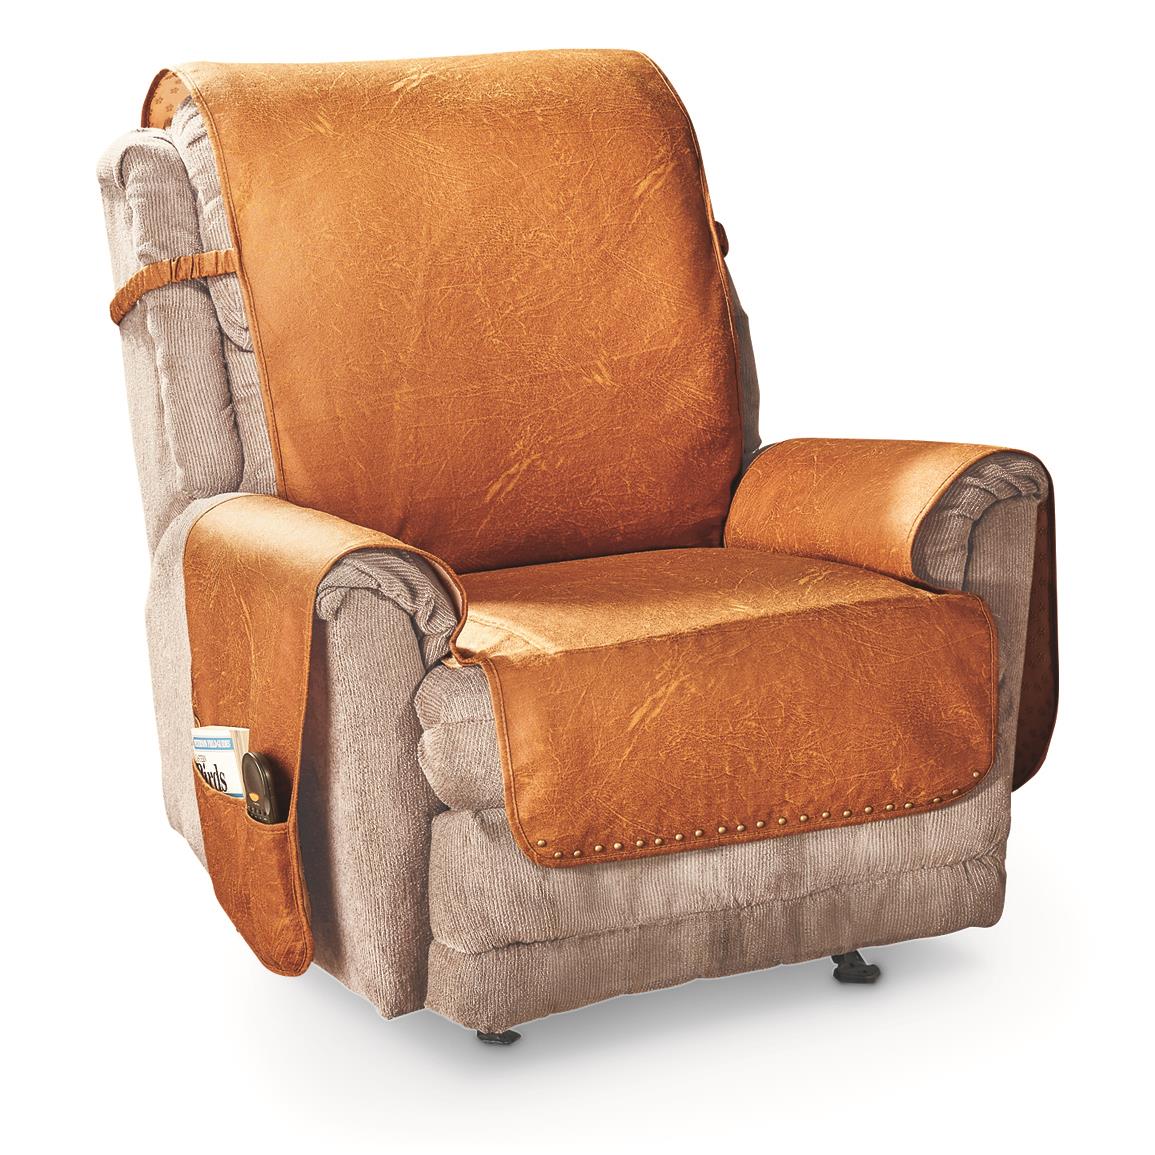 Faux Leather Recliner Cover - 666210, Furniture Covers at Sportsman's Guide